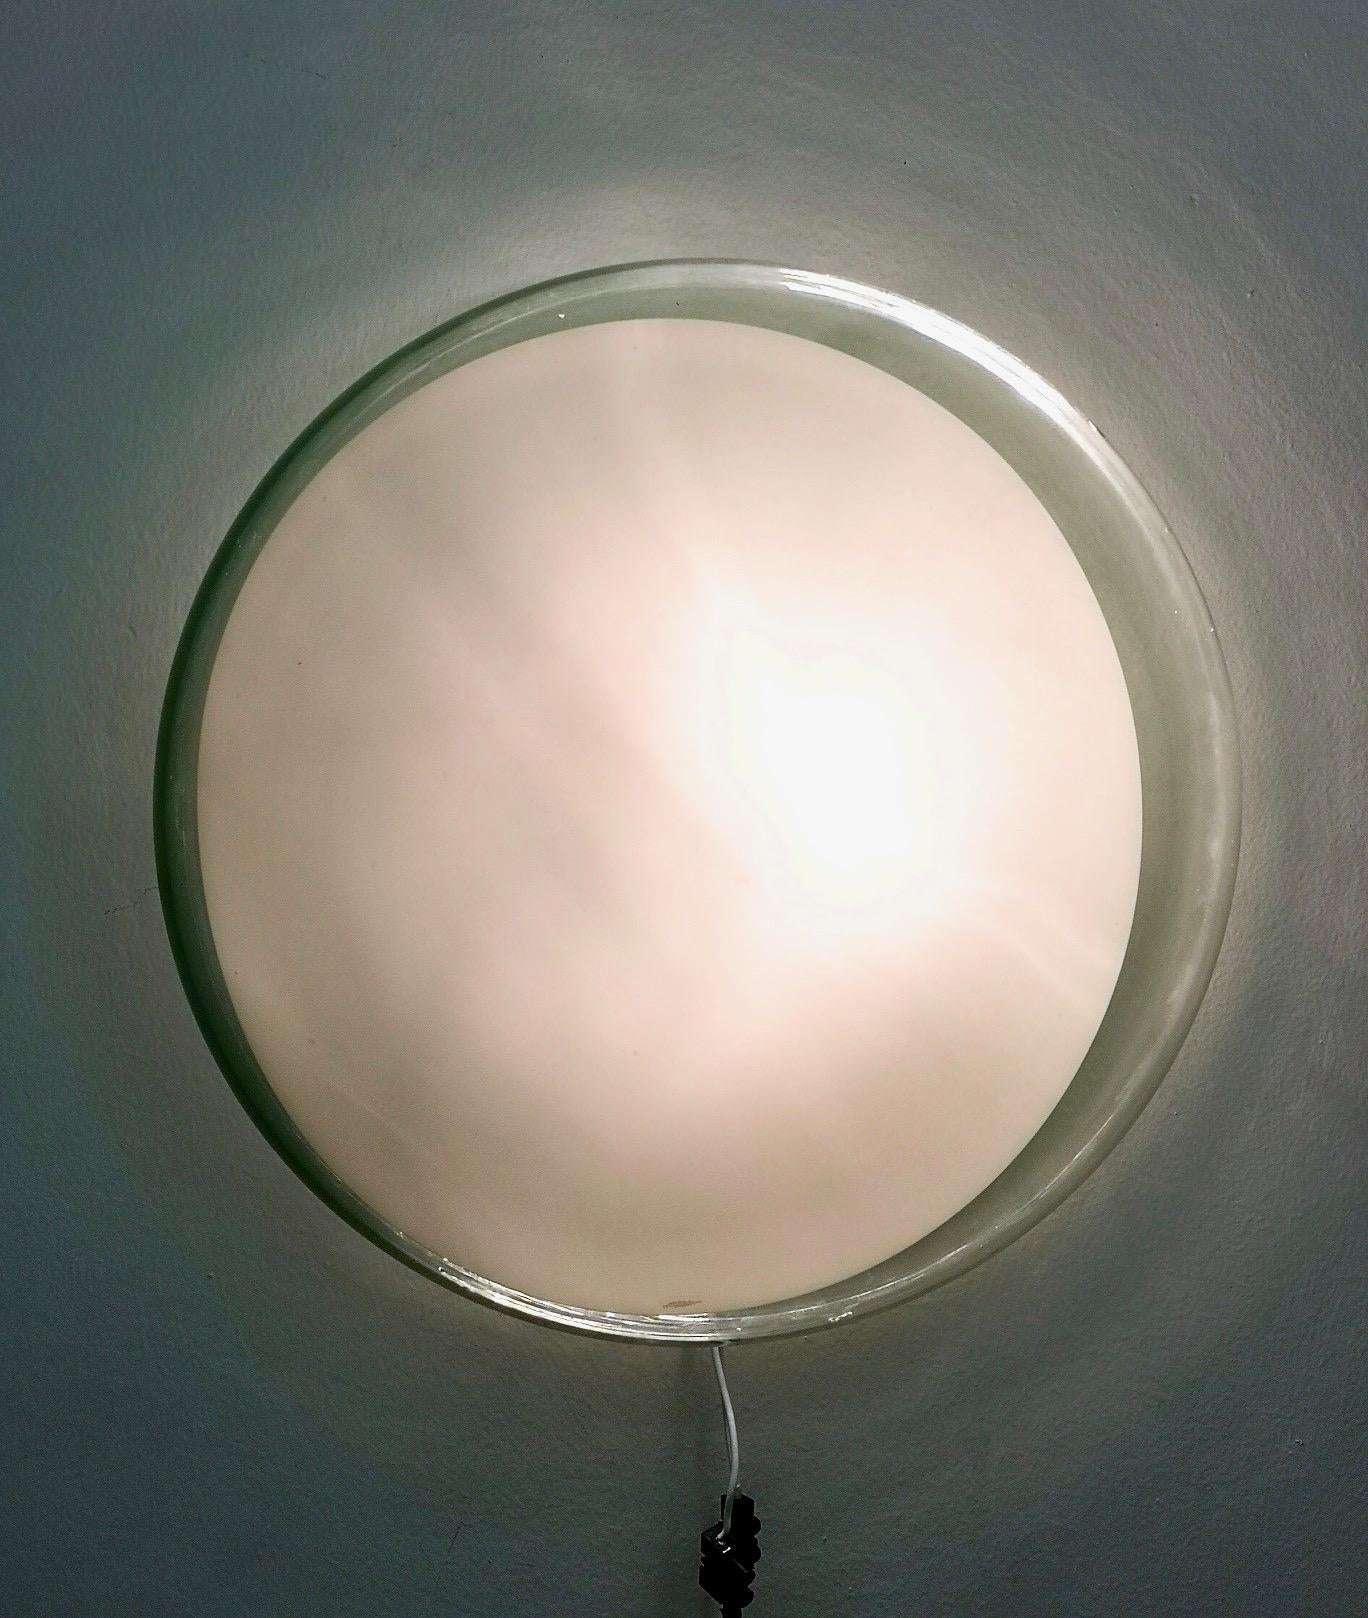 Leucos first designed this in 1962.
Gill is a wall or ceiling mount featuring a round, blown-glass diffuser in clear Murano glass with a circular white detail across the front.
The glass diffuser is held in place with three screws that secure it